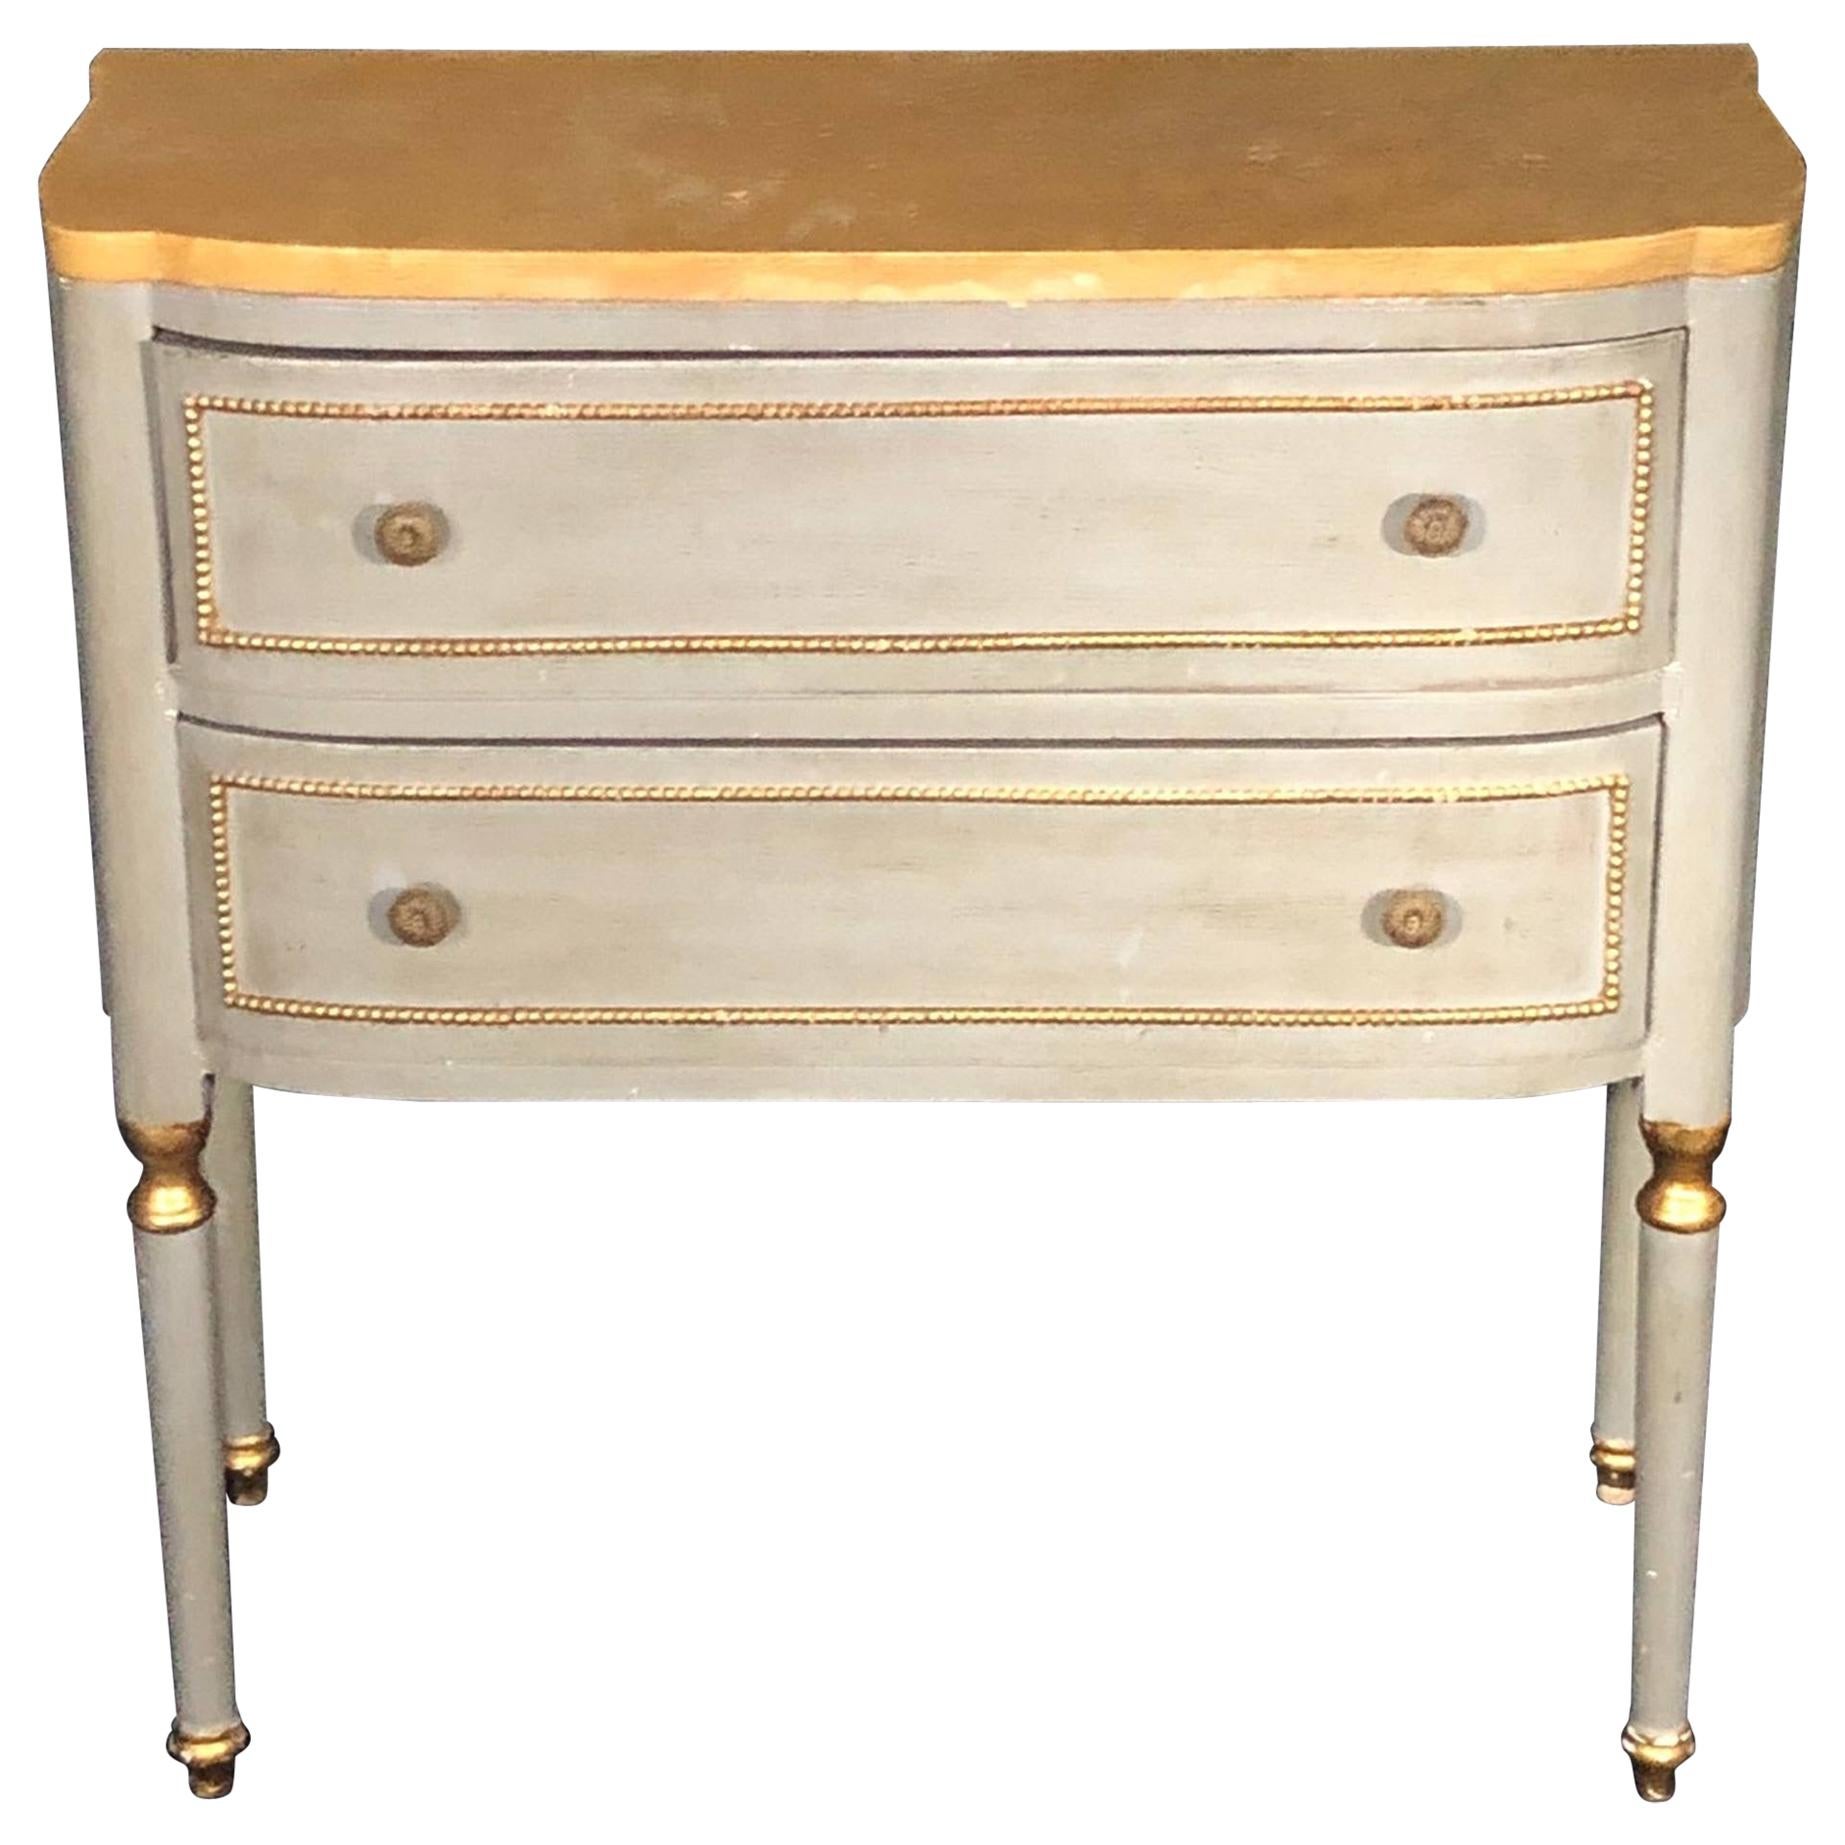 Italian Painted Two-Drawer Gustavian Style Commode Chest of Drawers